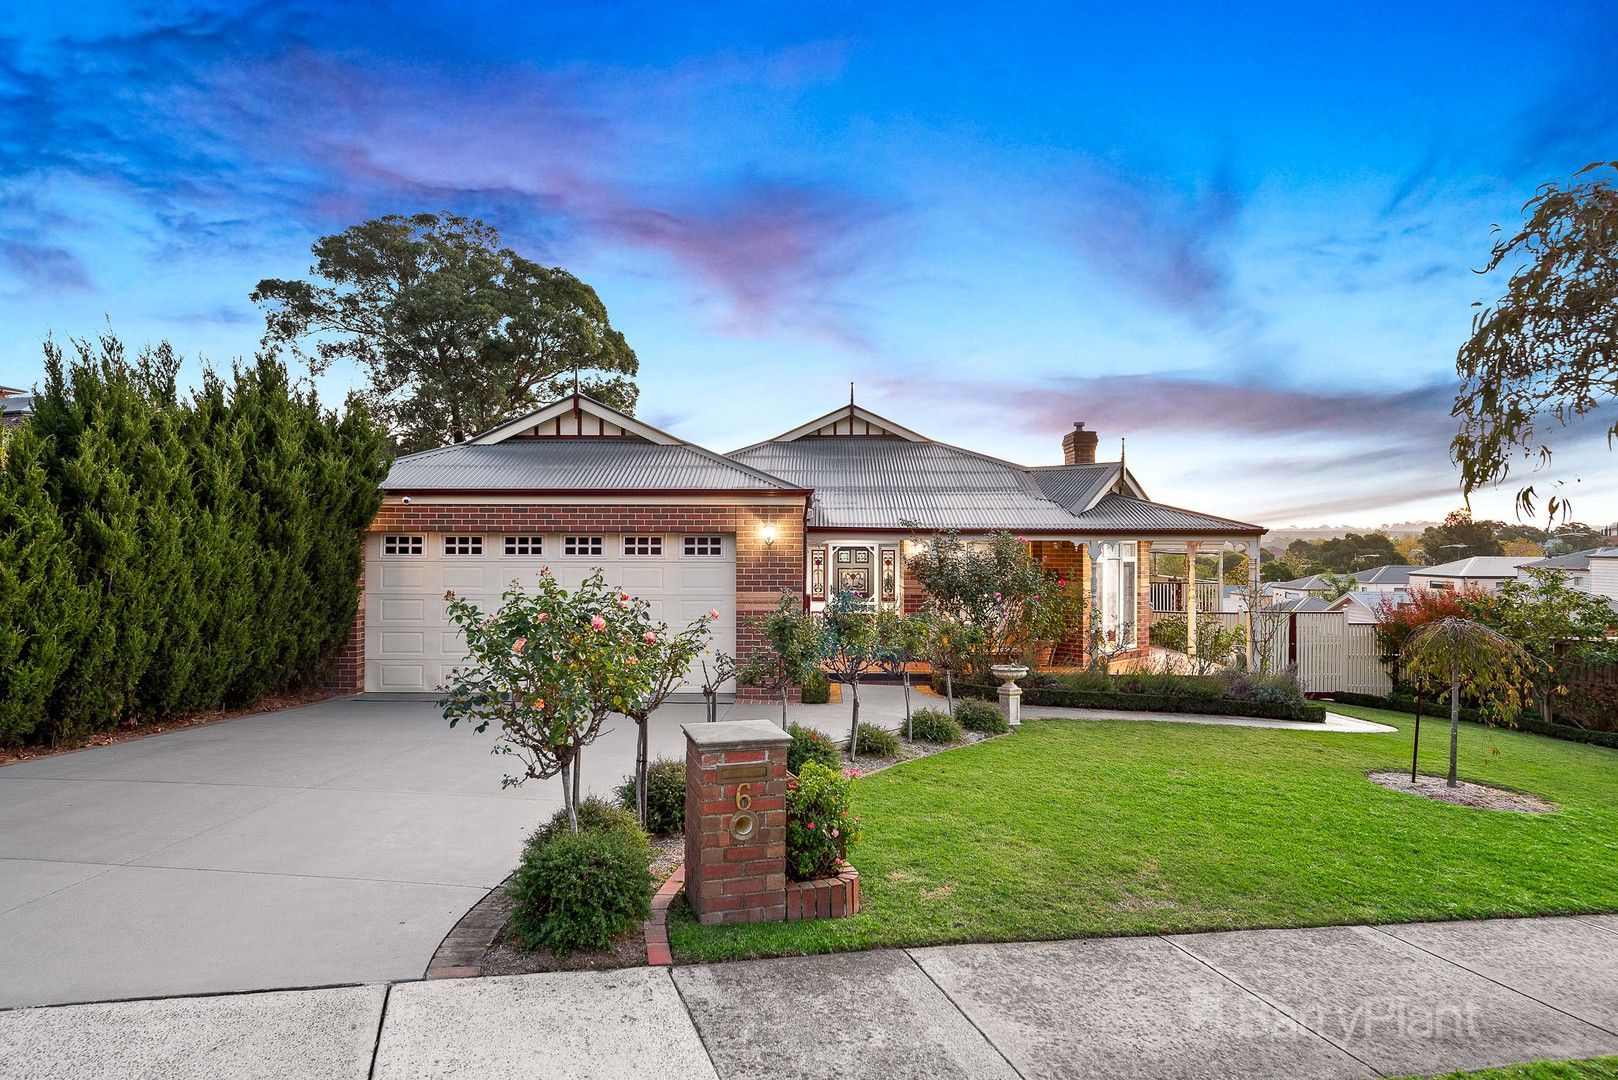 6 Mikey Boulevard, Beaconsfield VIC 3807, Image 0